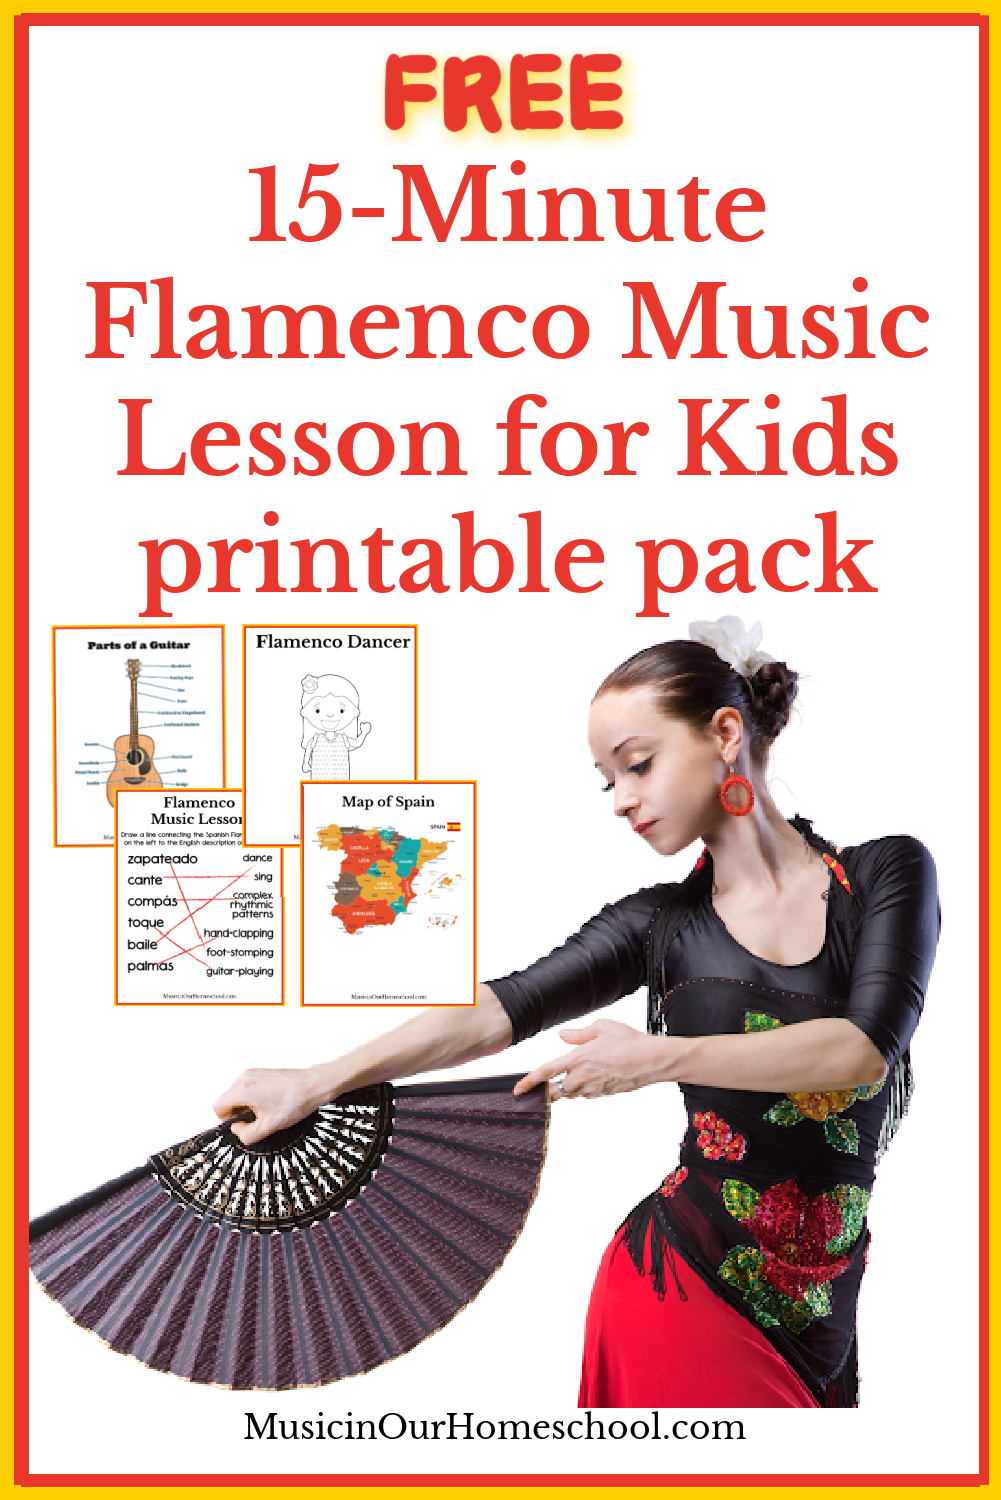 FREE 15-Minute Flamenco Music Lesson for Kids printable pack